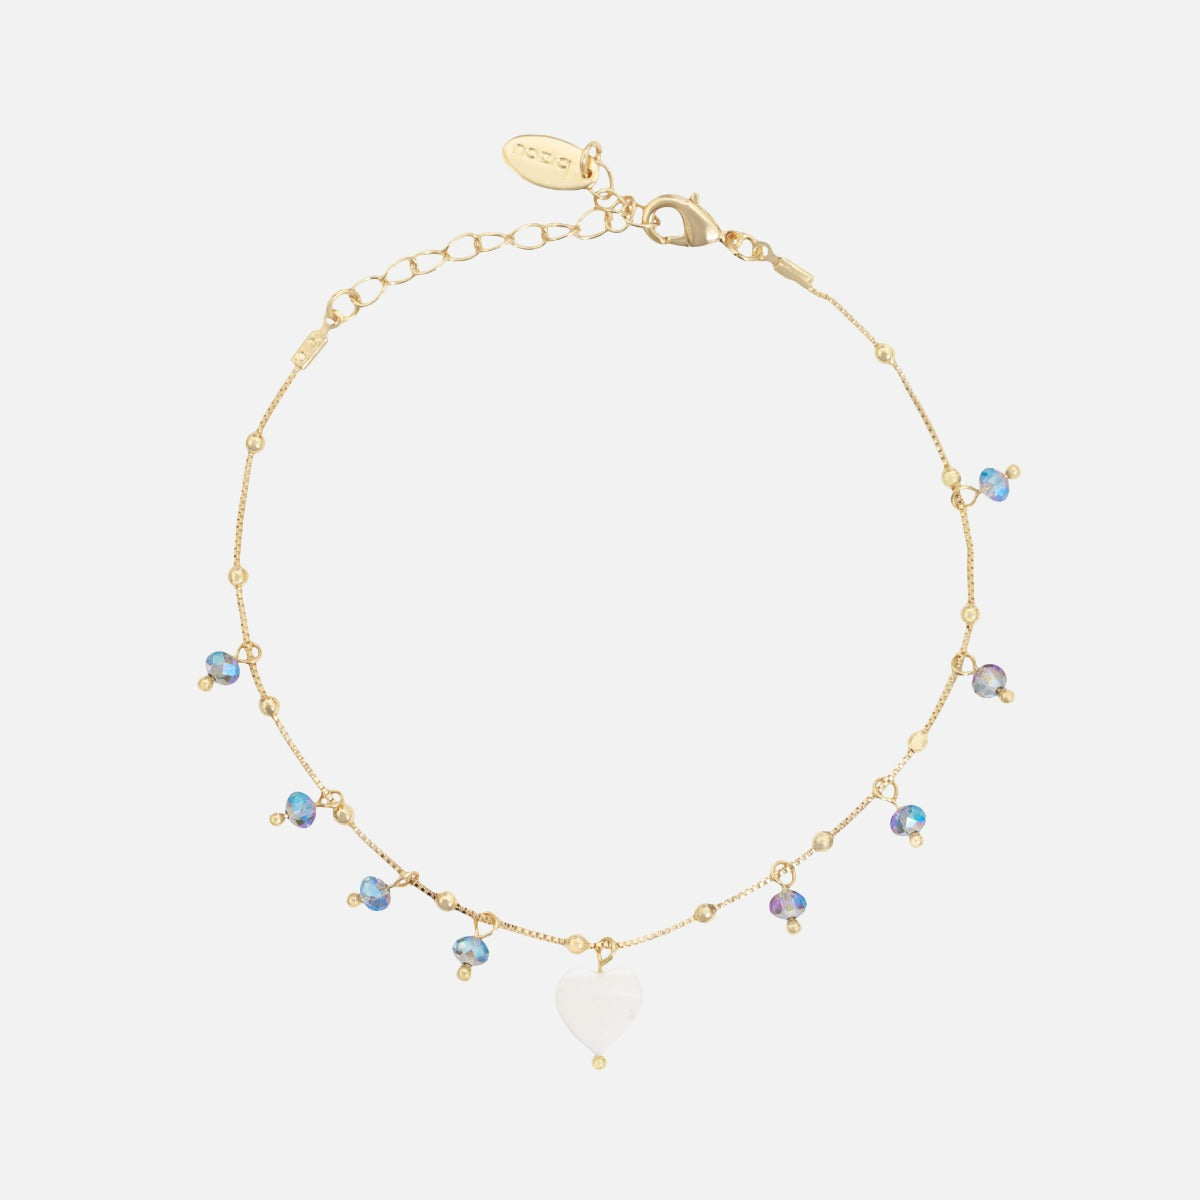 Golden ankle chain with blue beads and heart charms